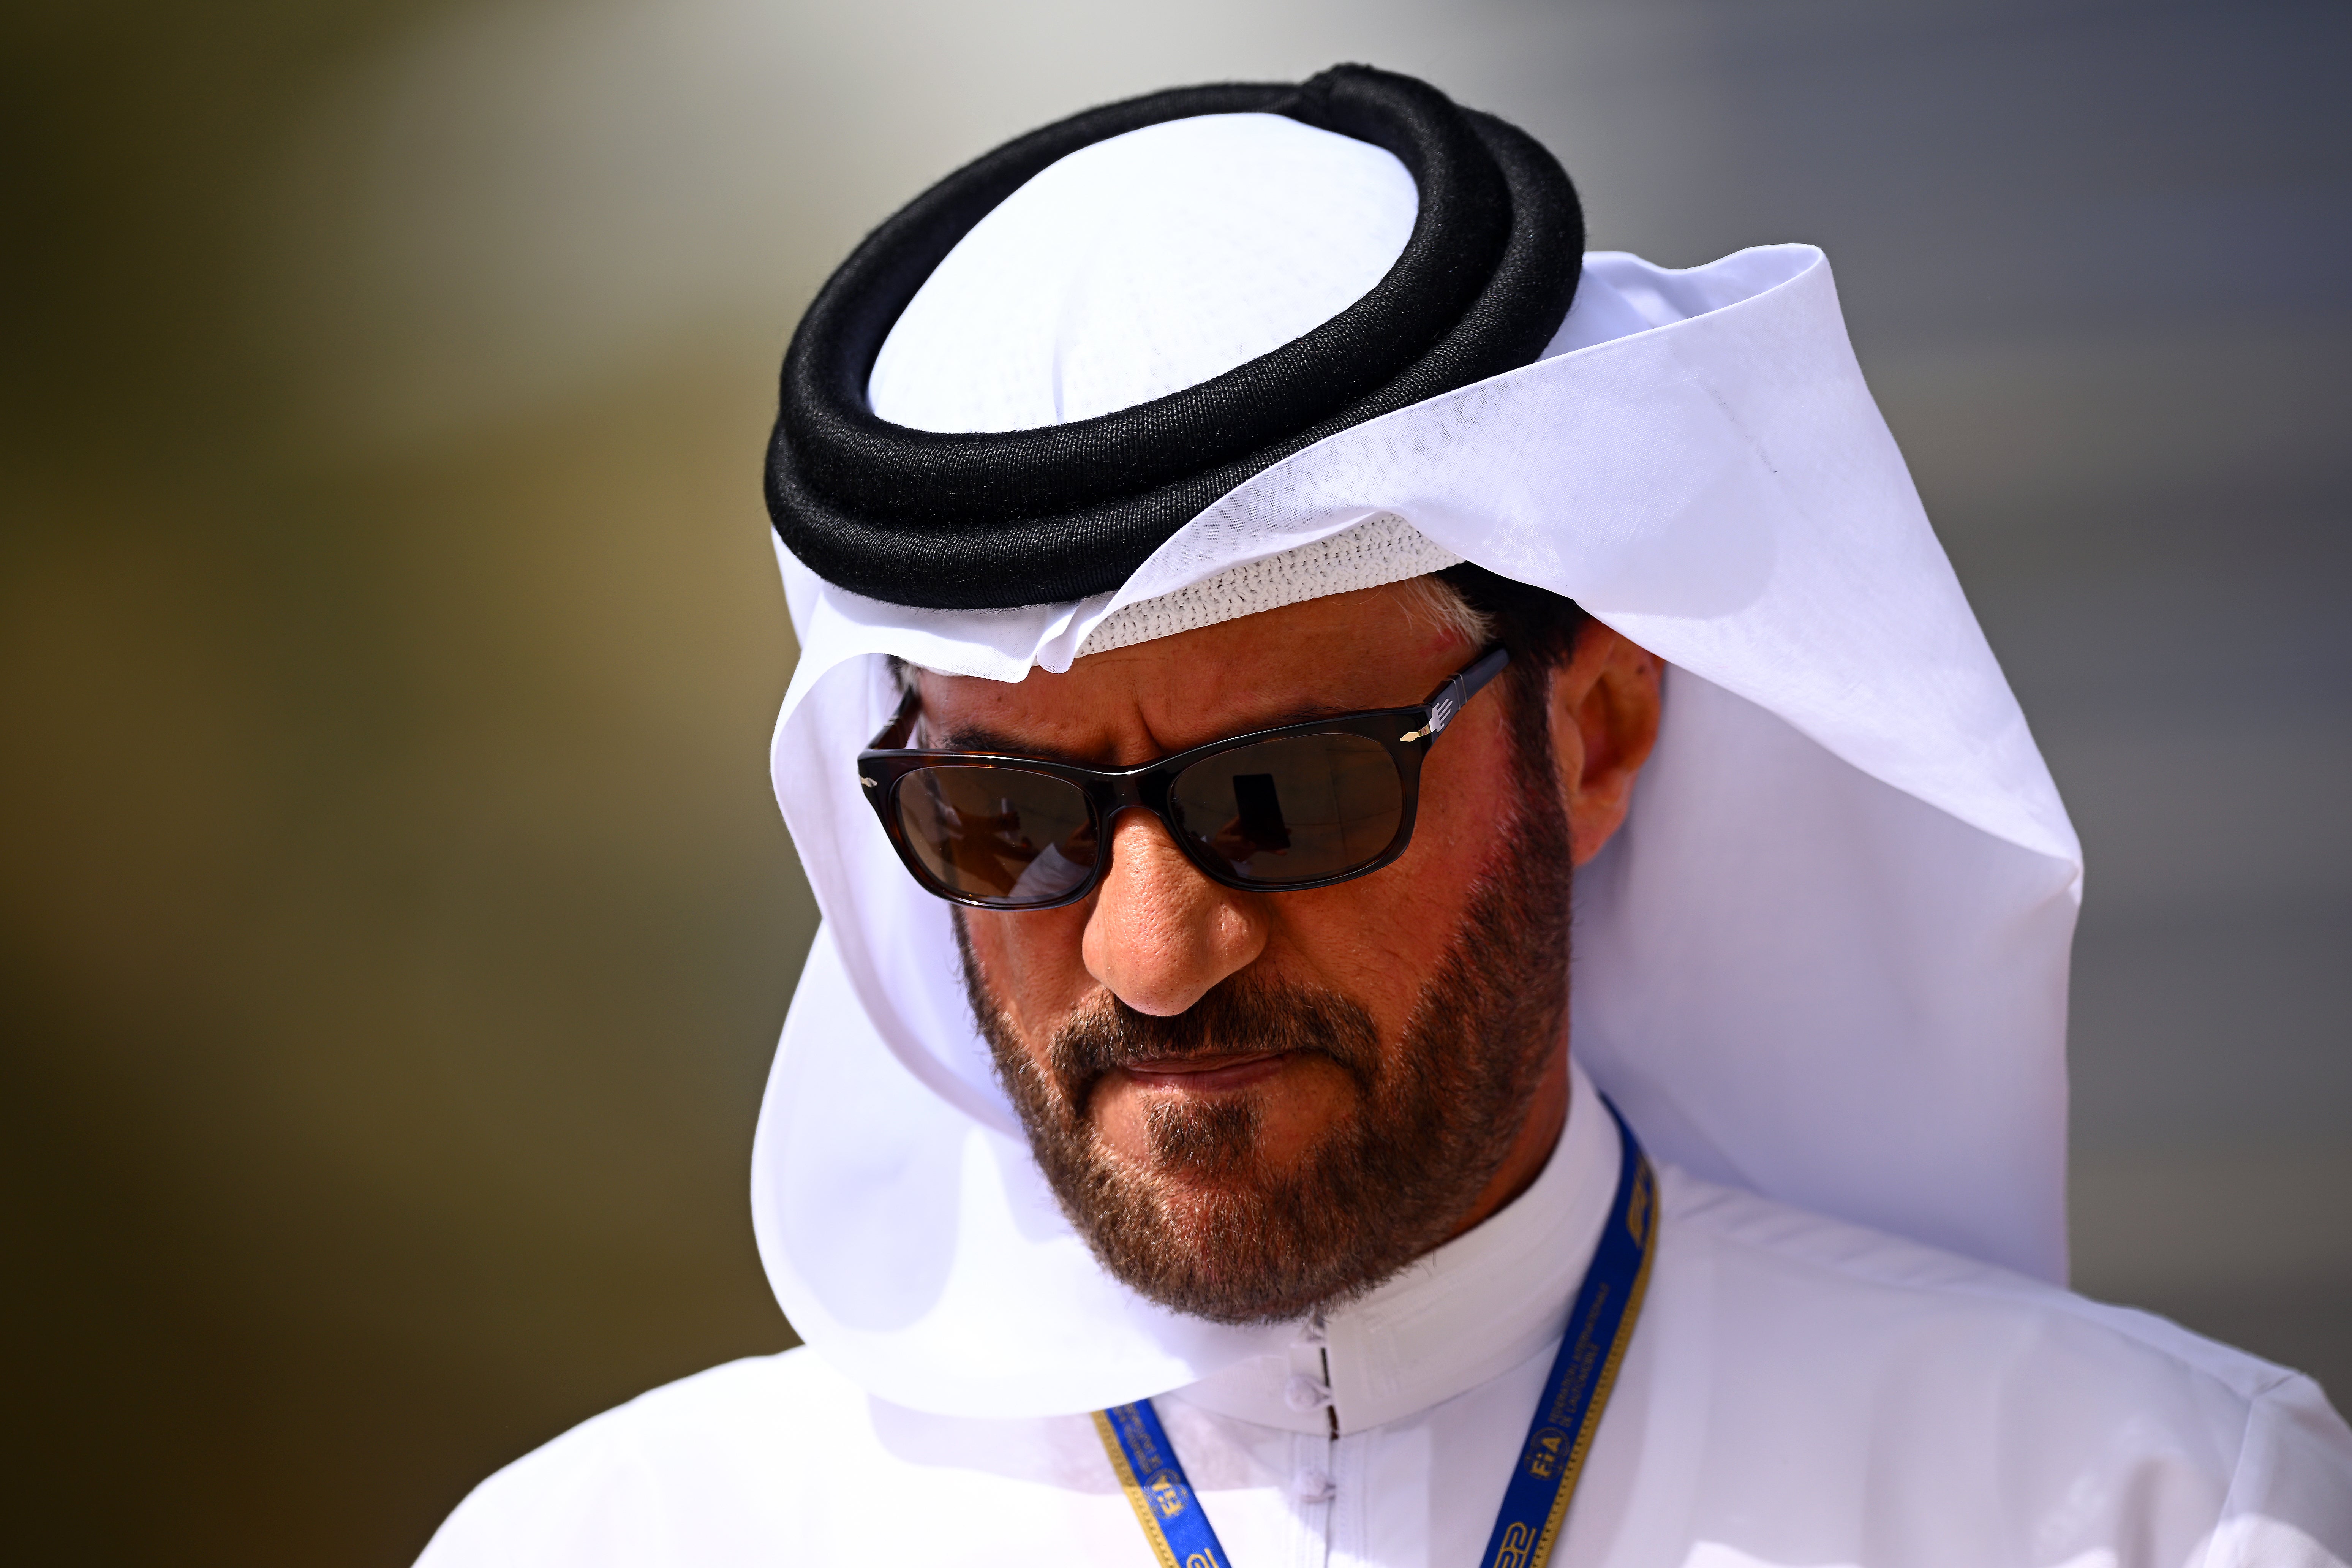 Mohammed Ben Sulayem has expressed his “surprise” at “adverse reaction” to Andretti’s bid to join F1 with Cadillac